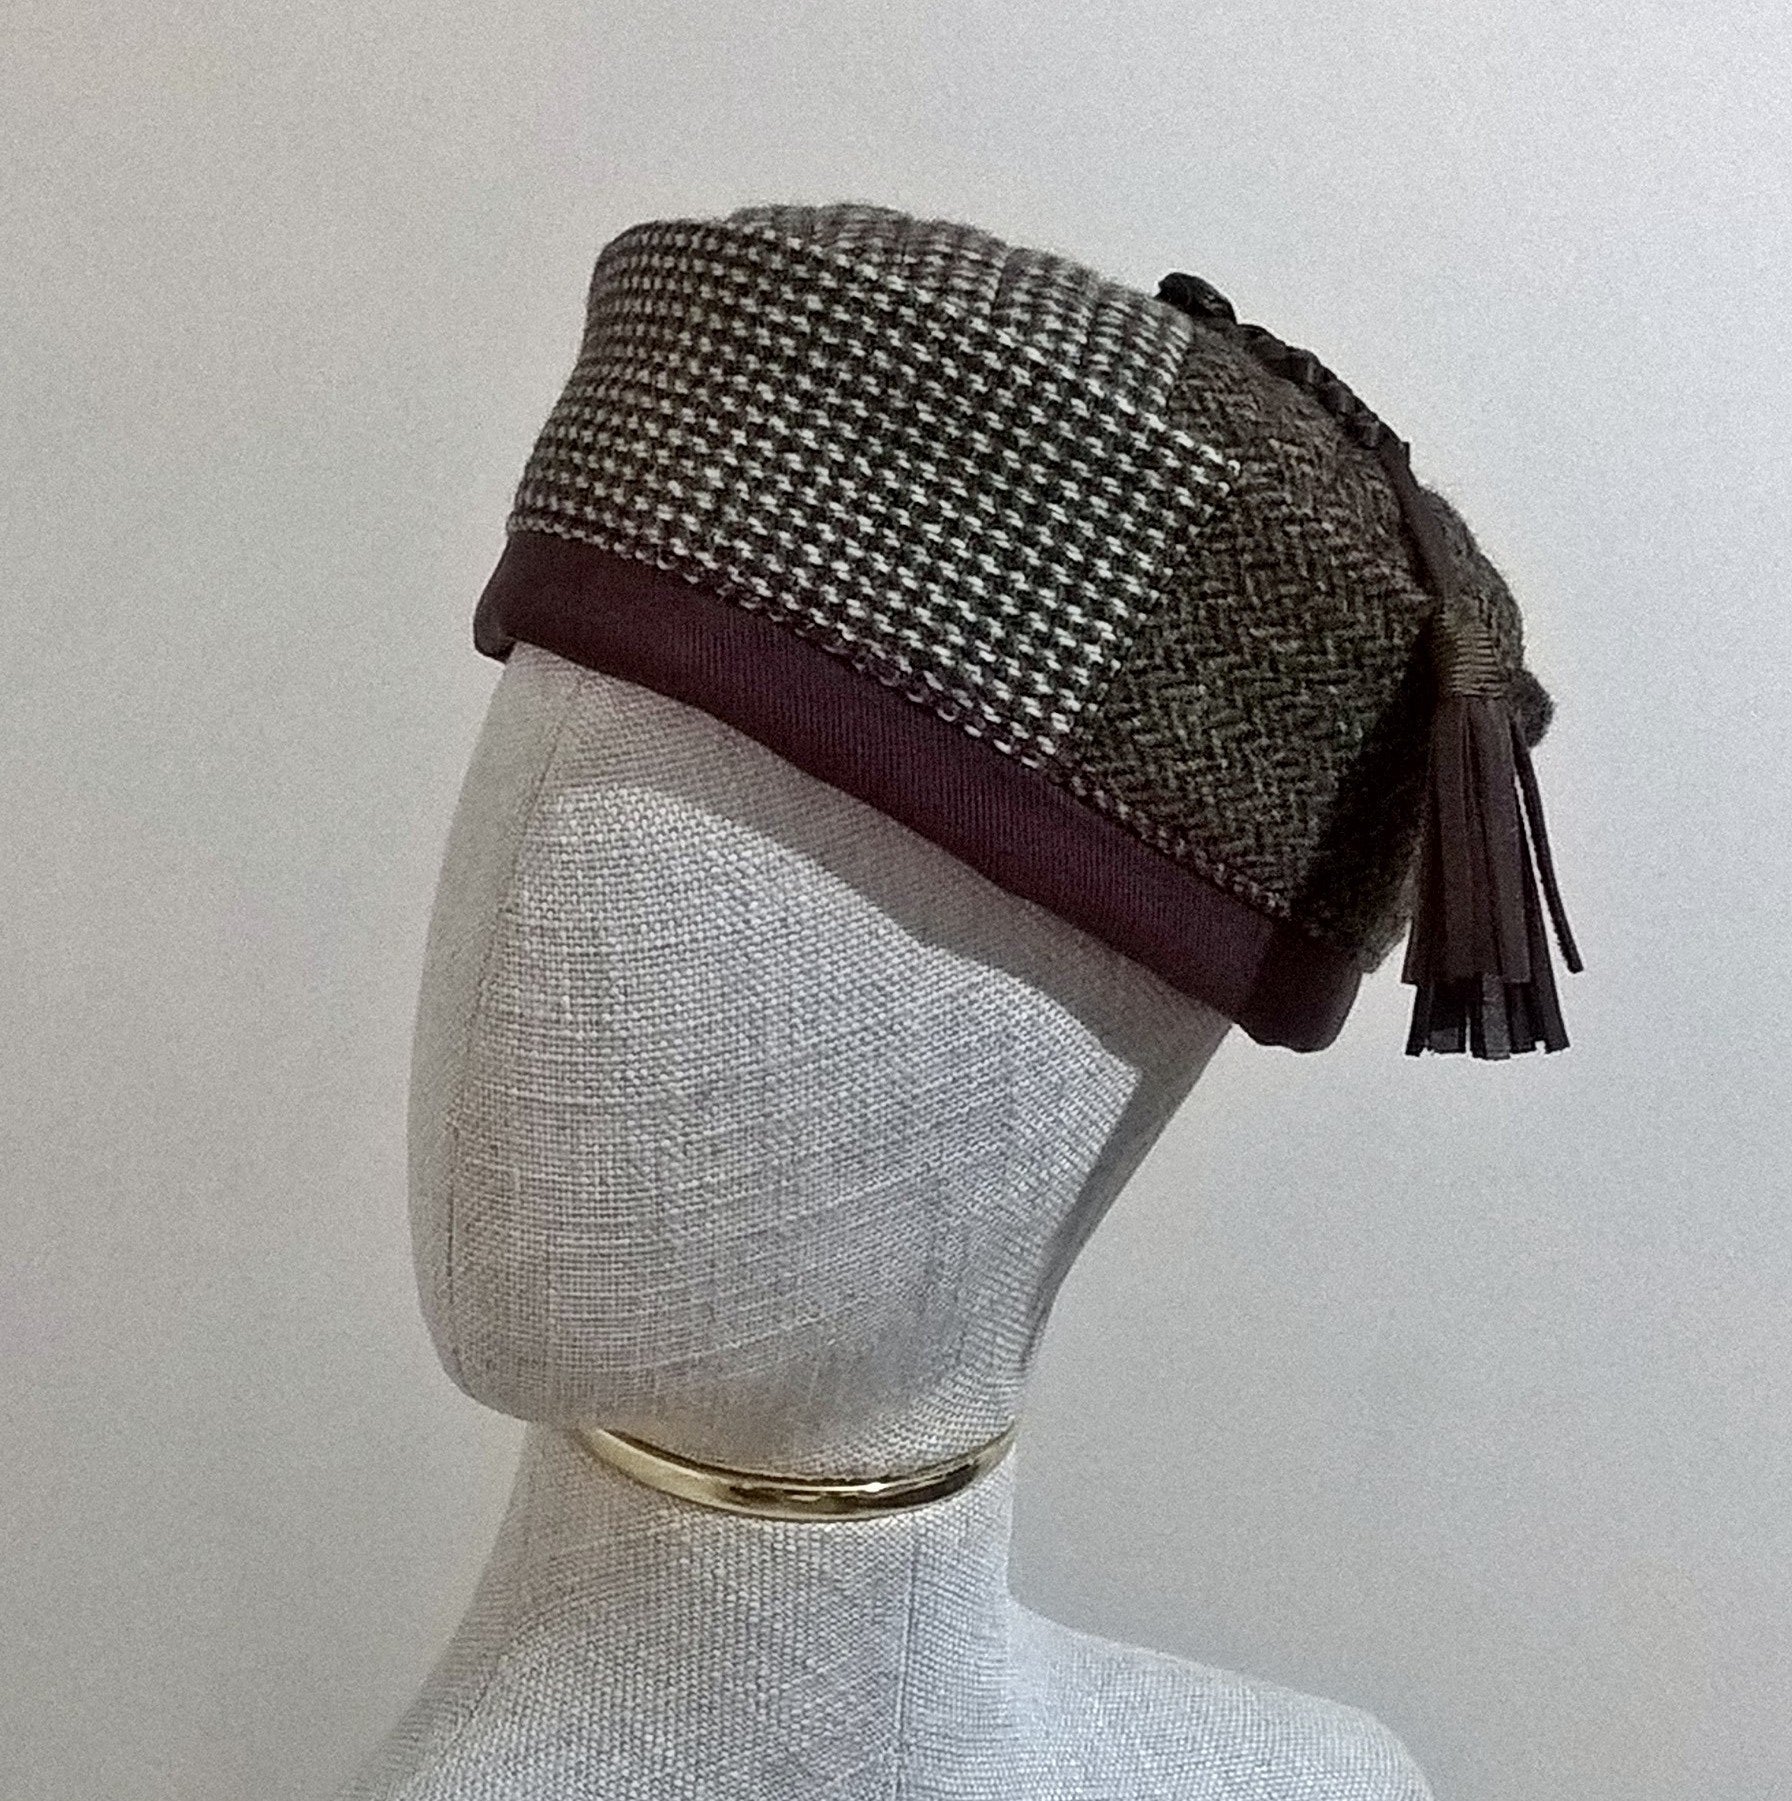 Mismatched Harris Tweed wool smoking cap  in patchwork design with leather tassel